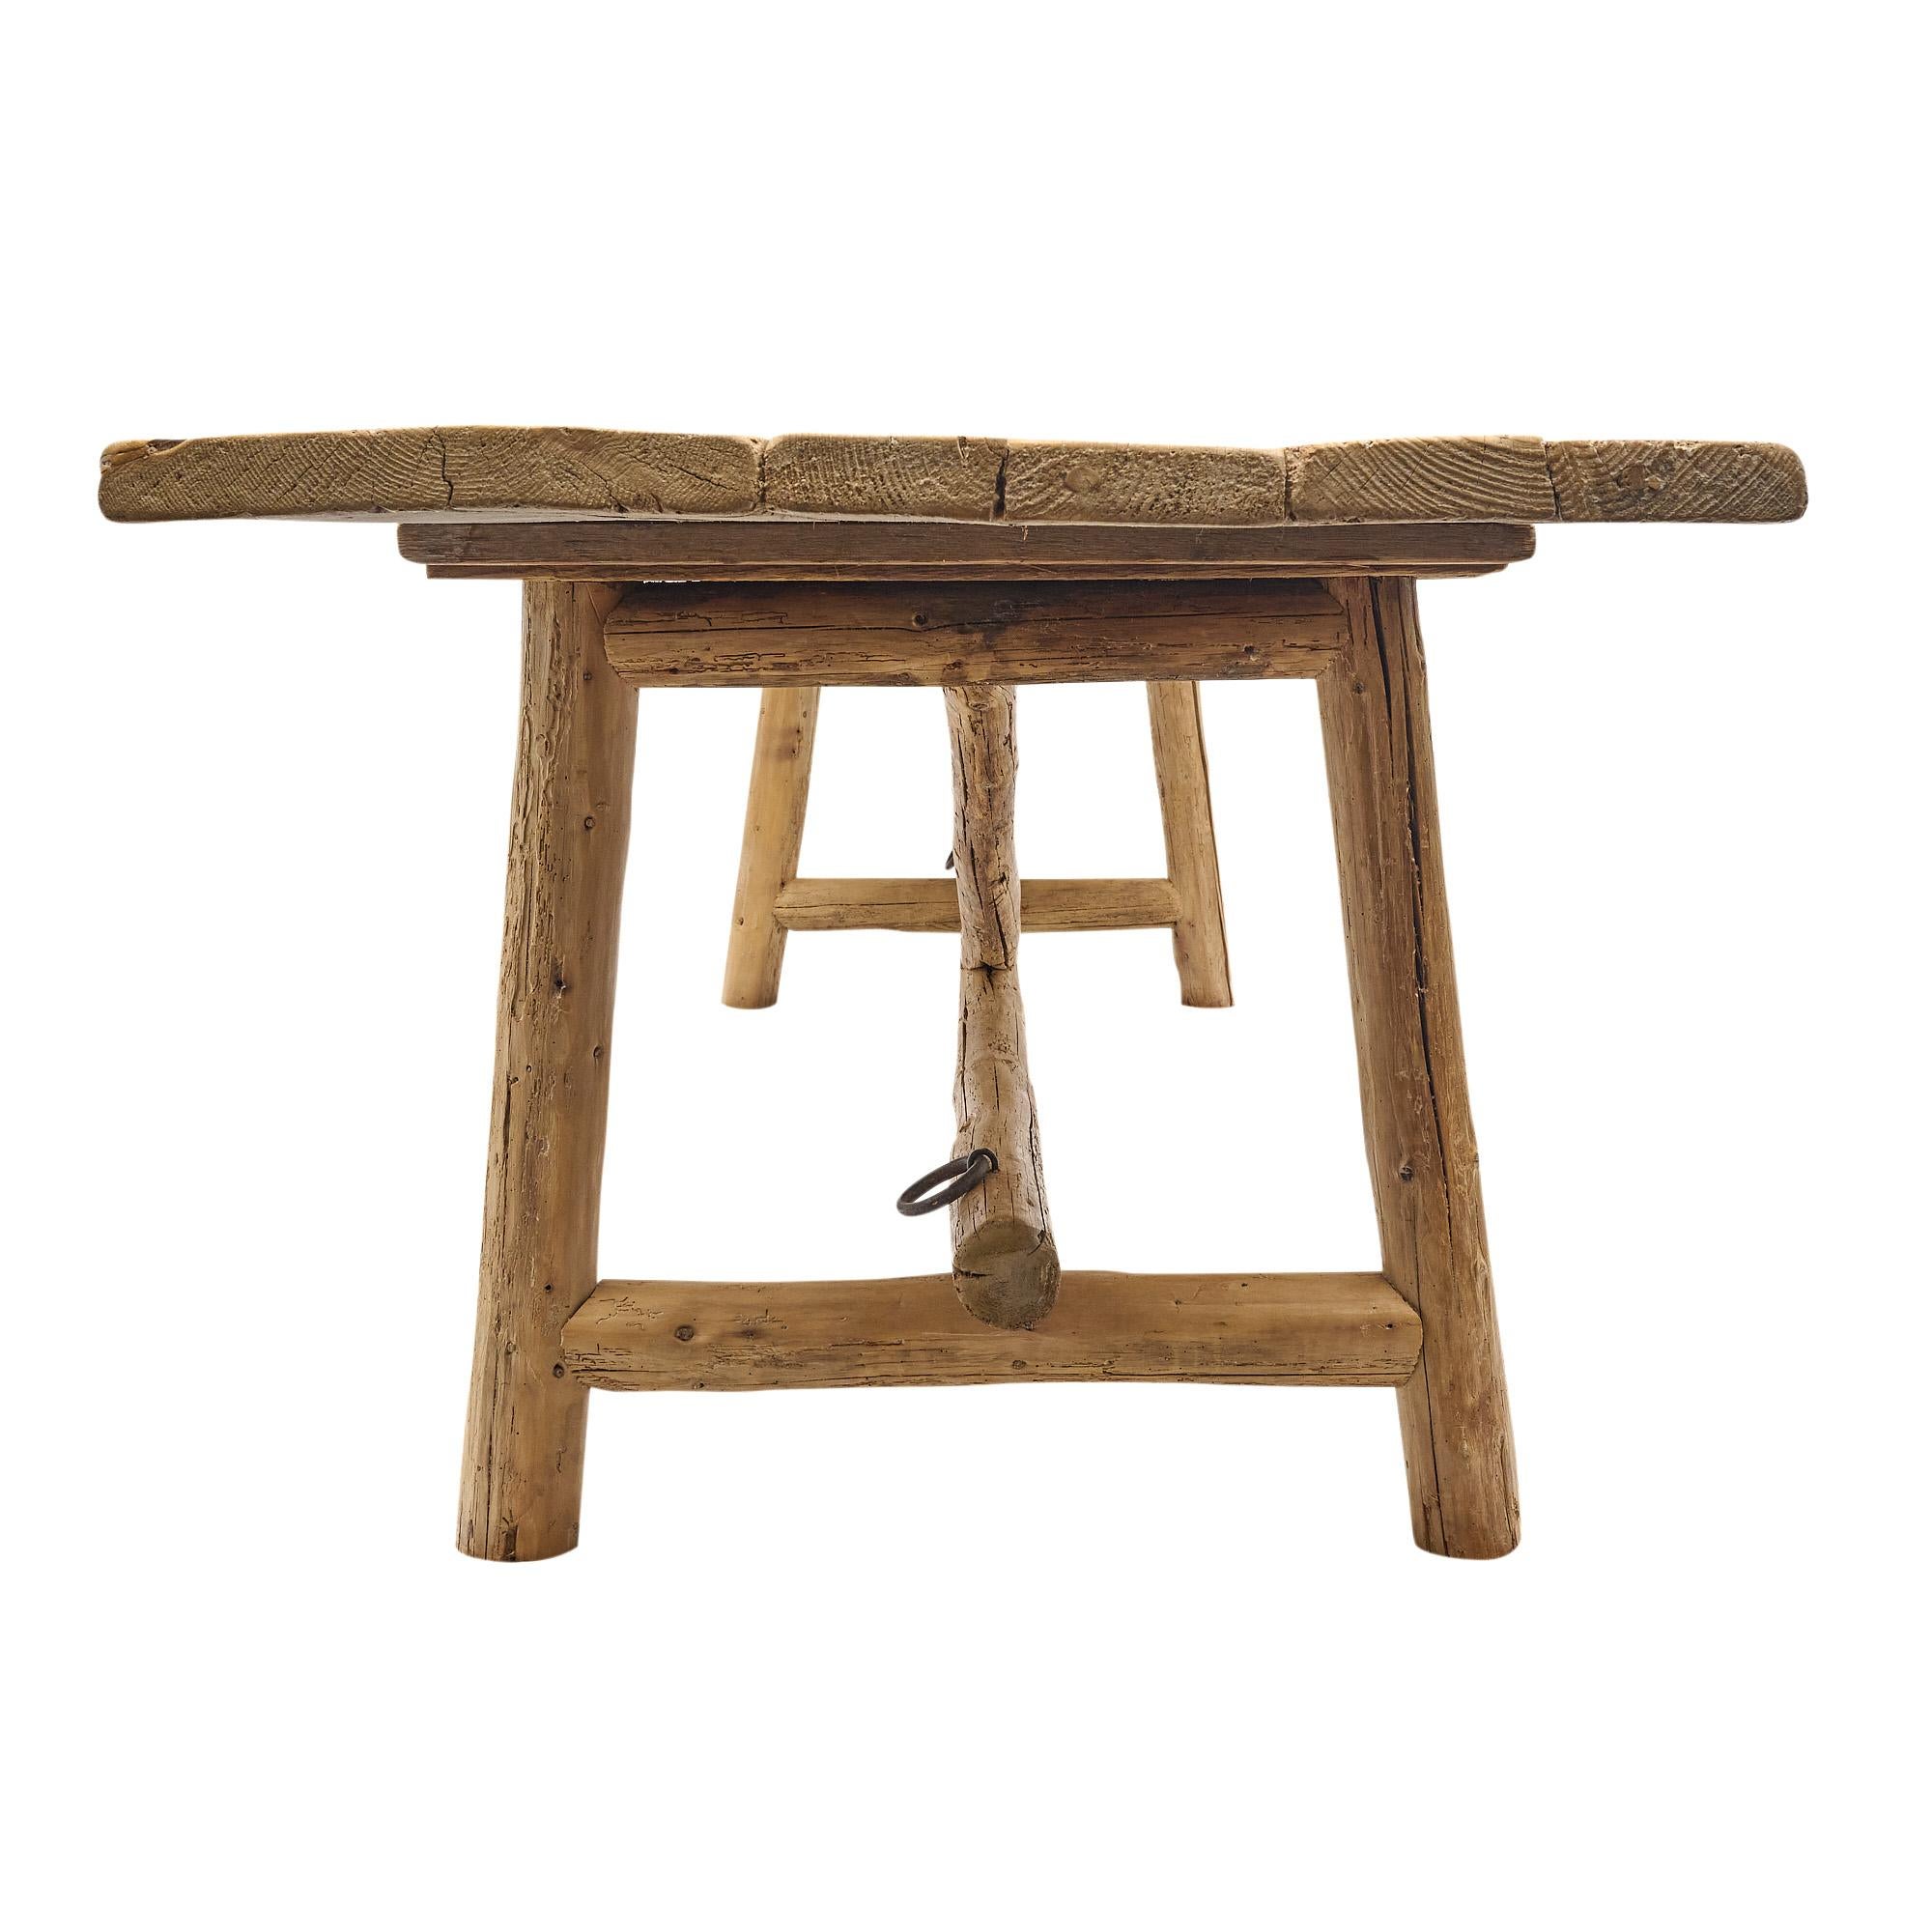 Farm table, Italian from the Emilia-Romagna region of Italy. It is made of alder wood, original pegged construction, three plank top.
